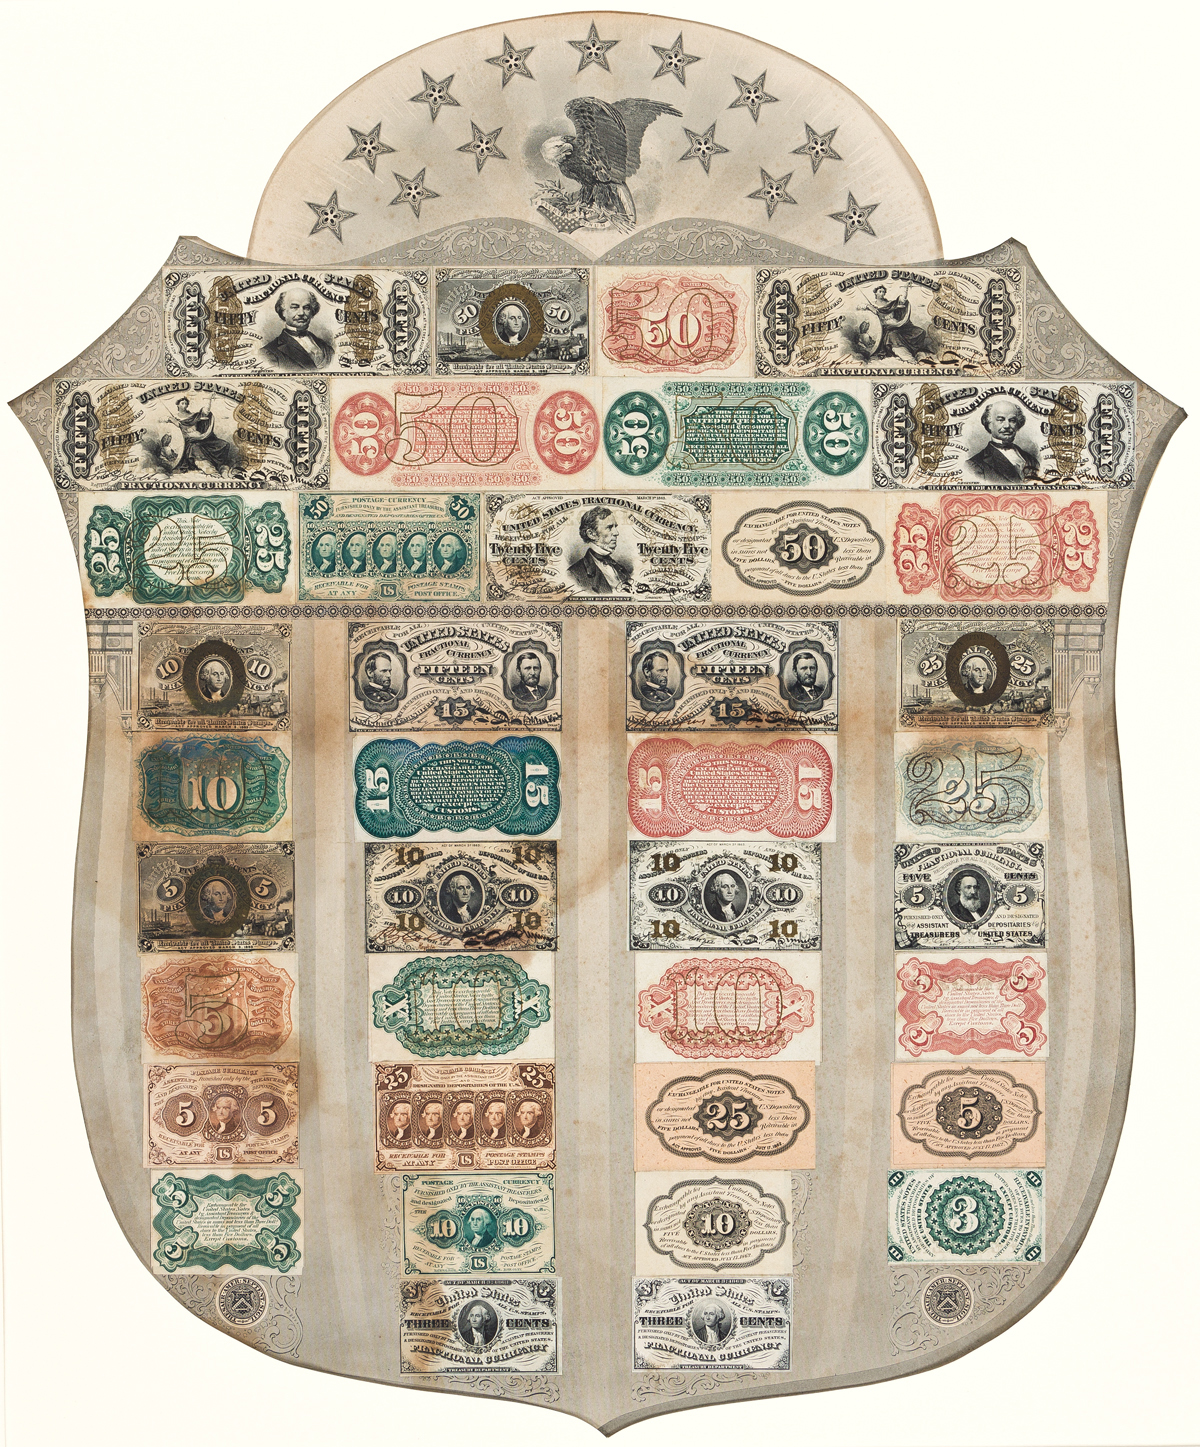 (CURRENCY.) Fractional currency shield with mounted specimen notes.